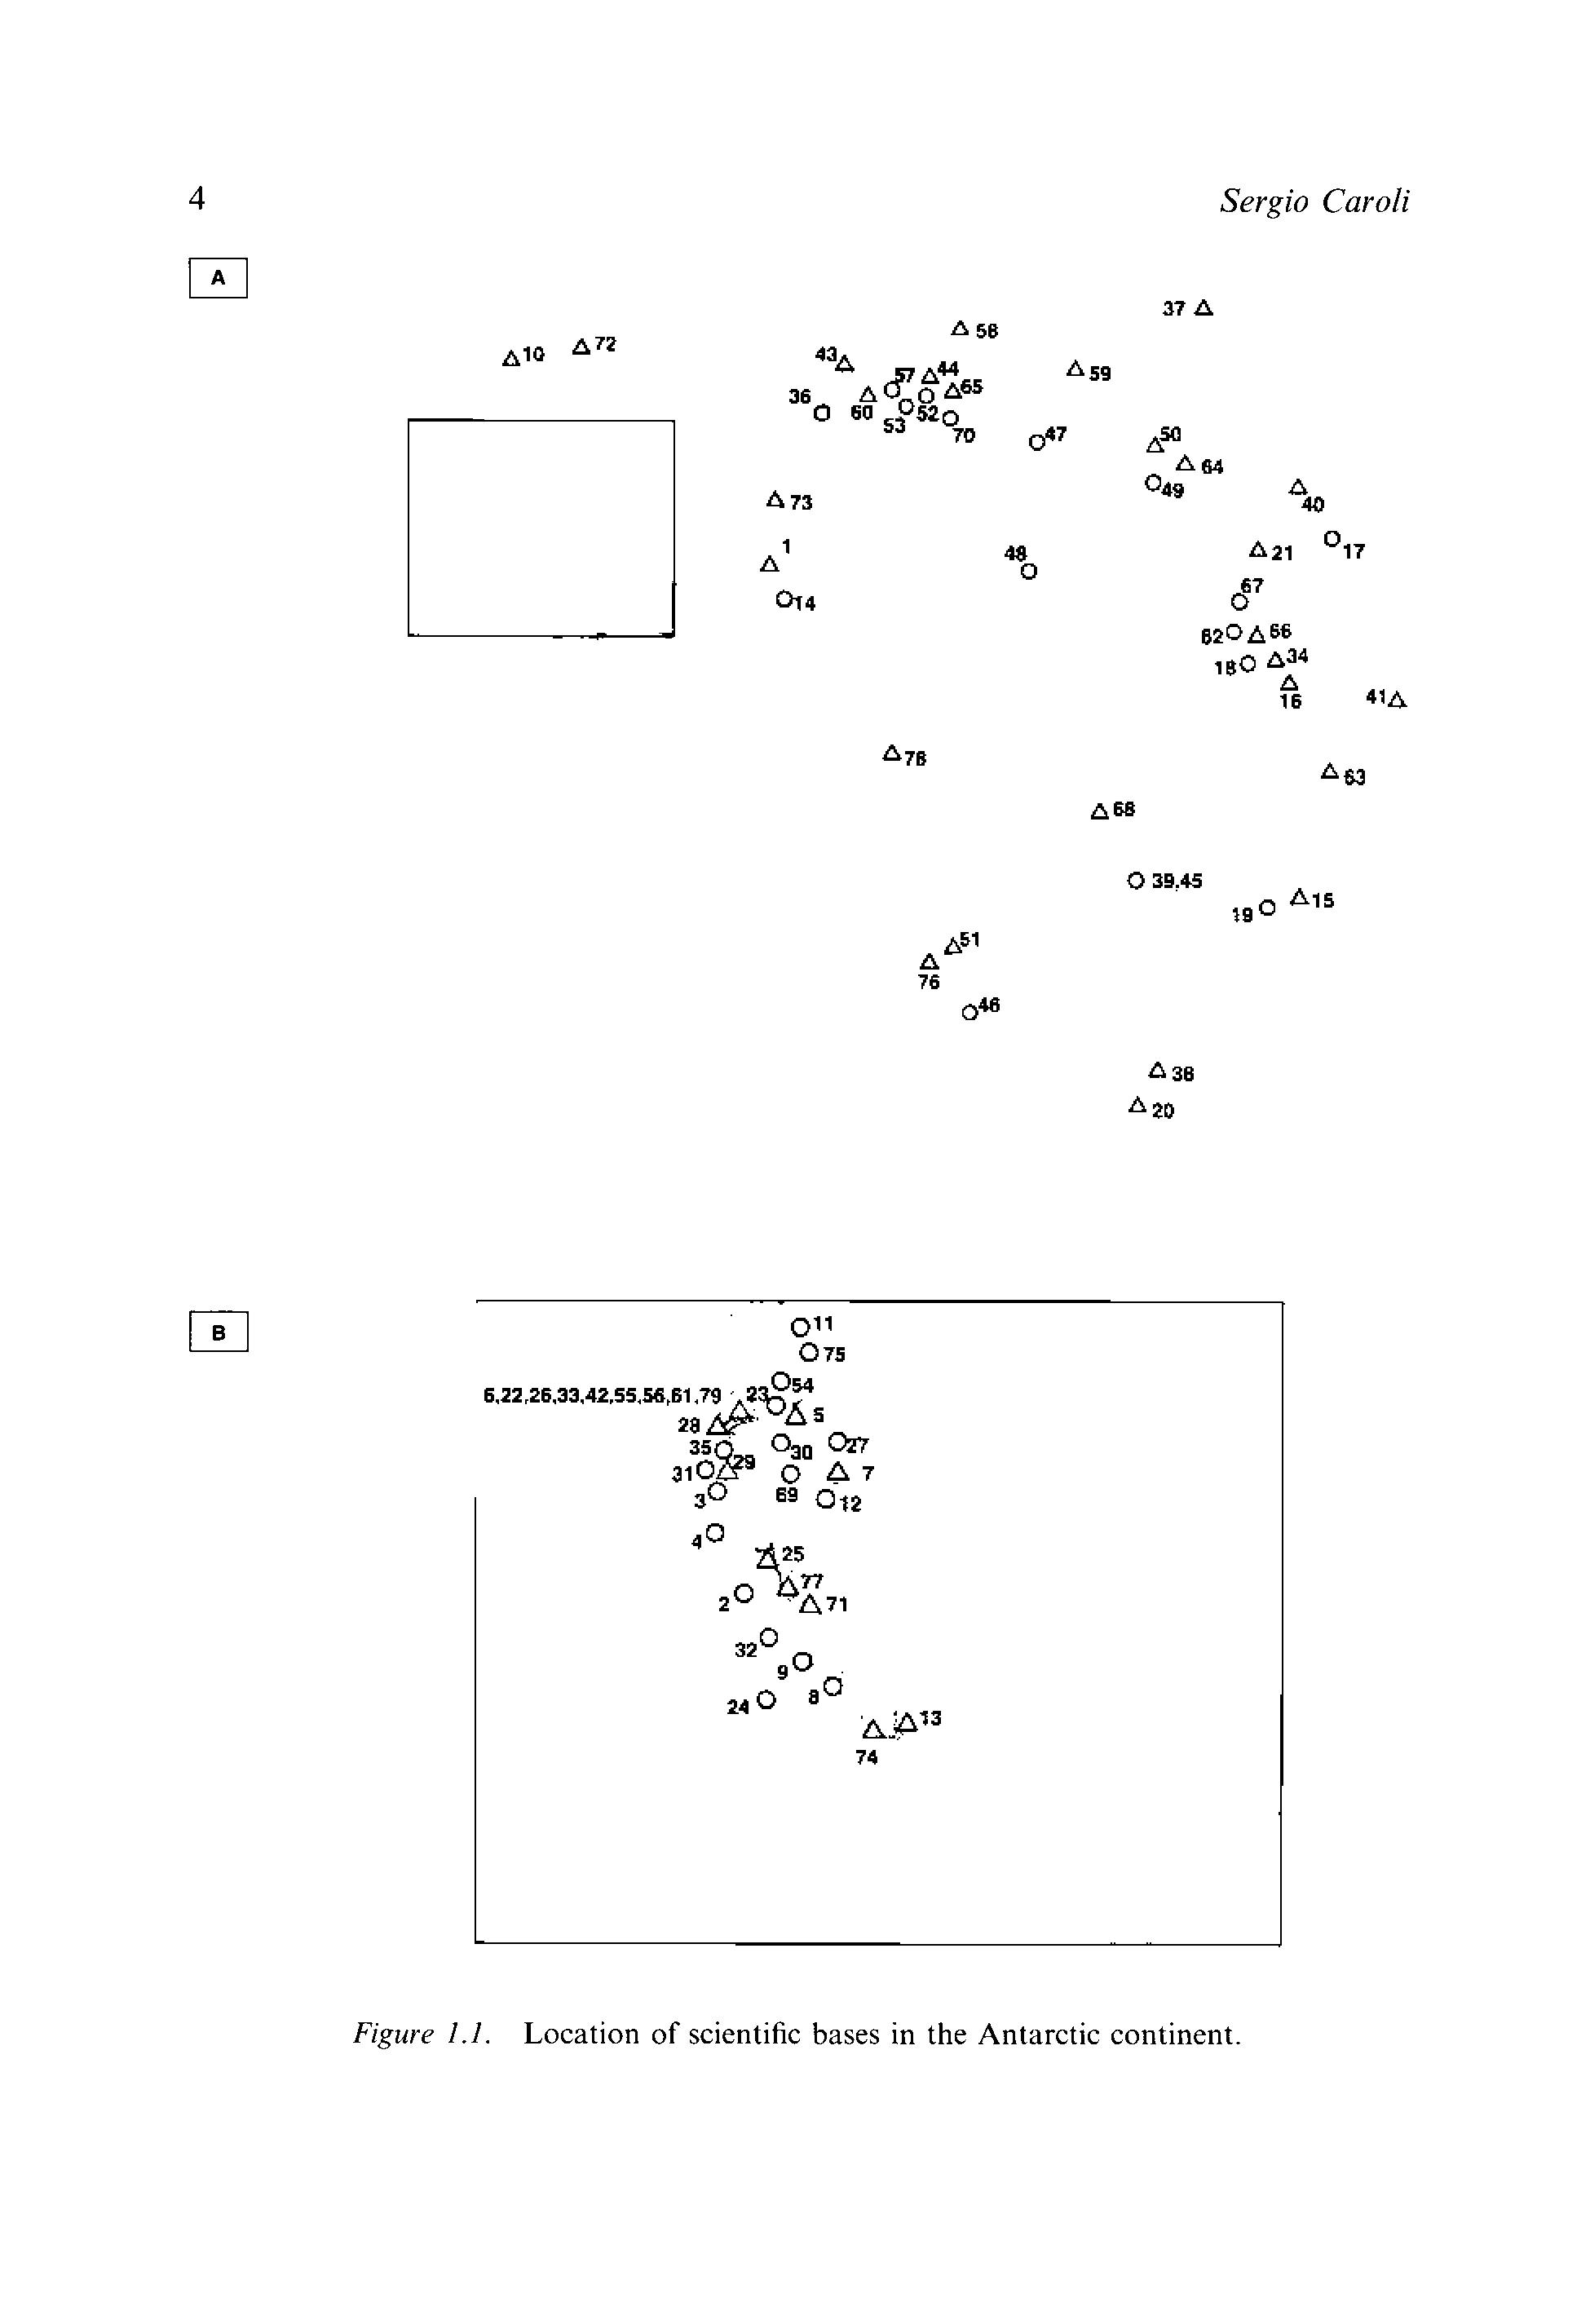 Figure 1.1. Location of scientific bases in the Antarctic continent.